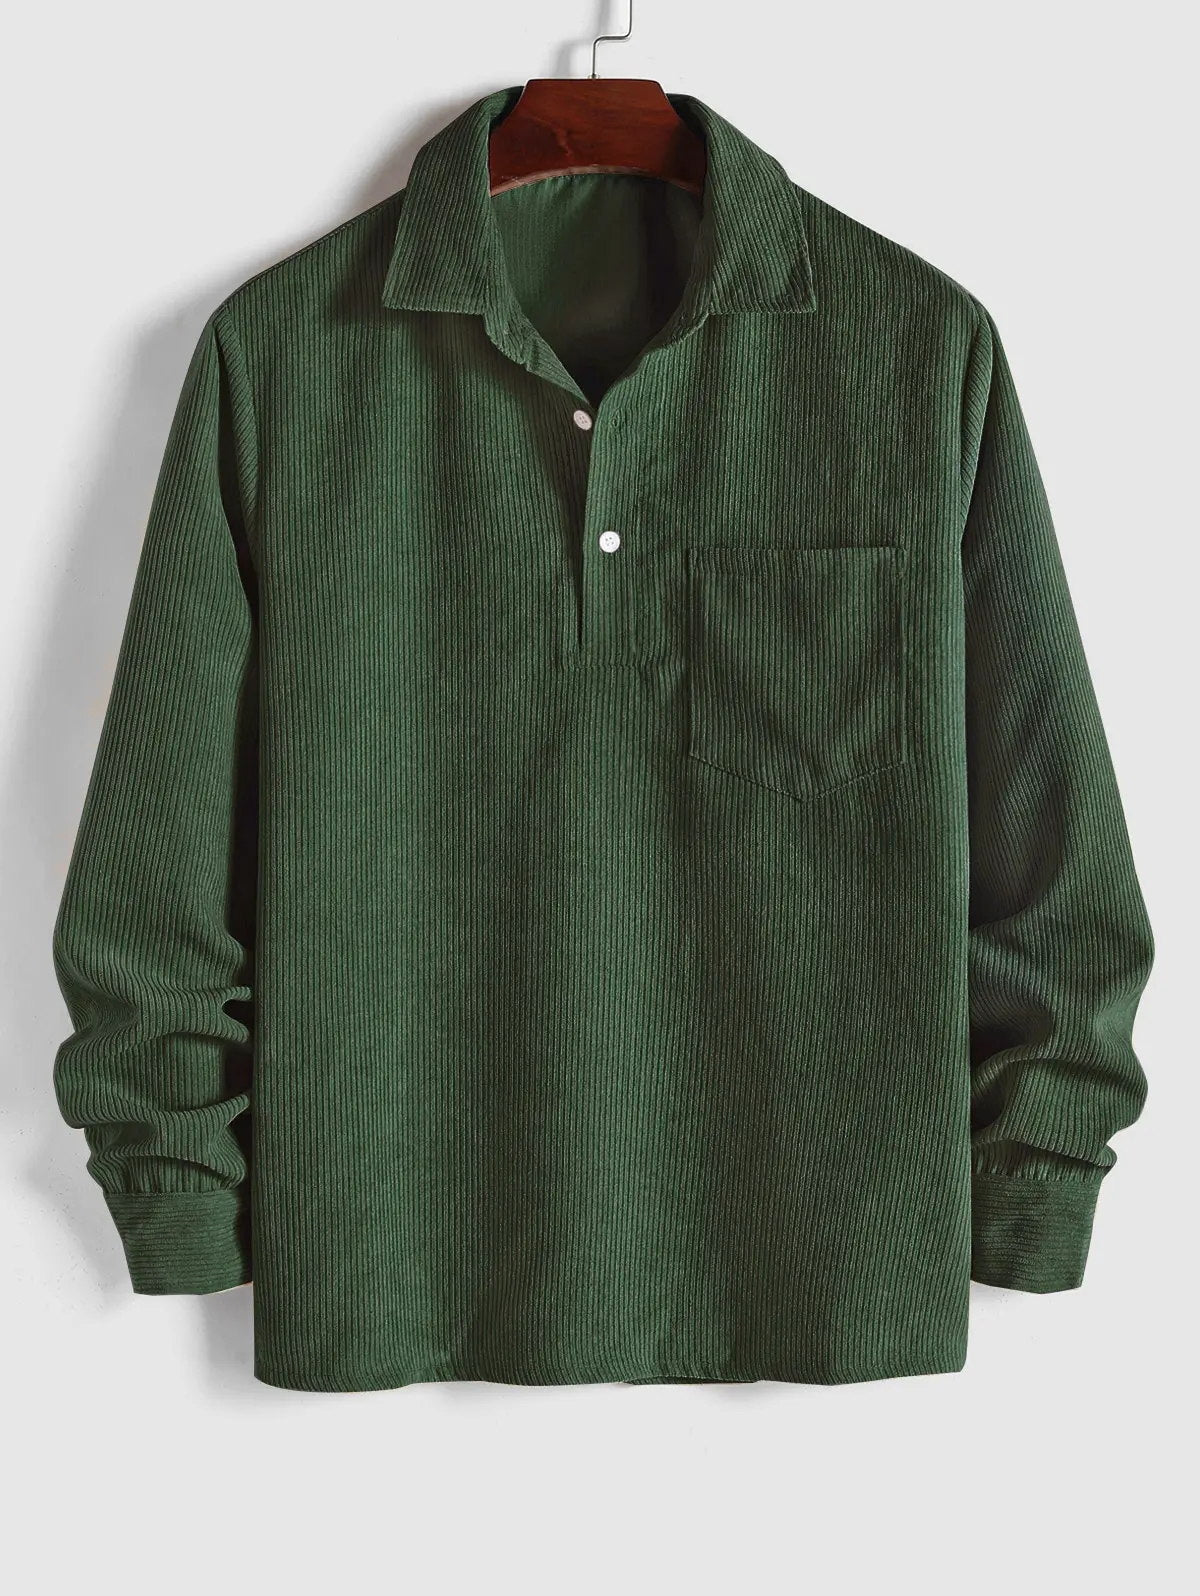 MEN'S SHIRT WITH HALF BUTTON AND LONG SLEEVES IN CORDURO